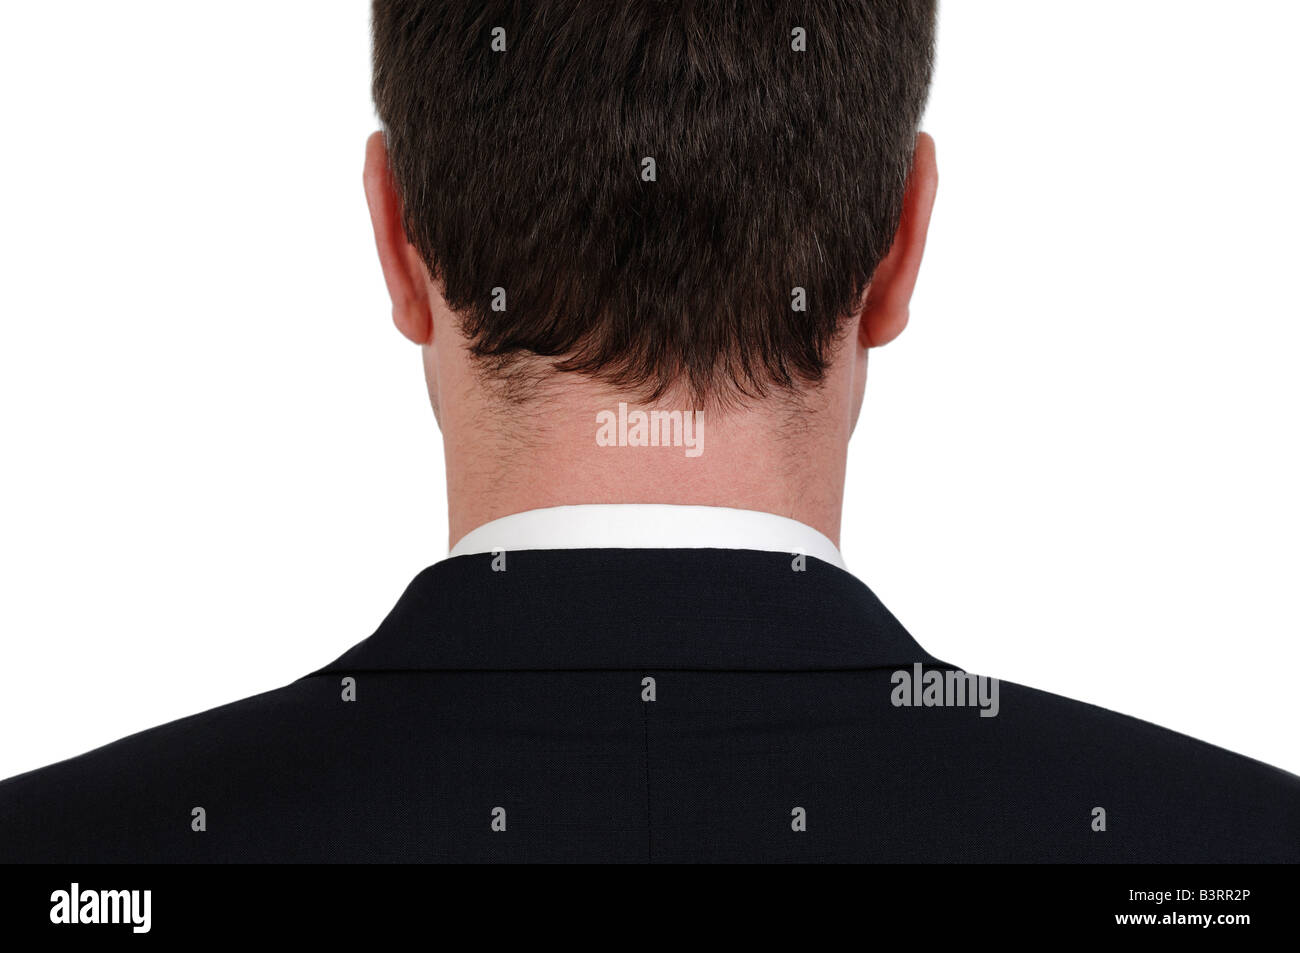 Rear View of the Back of the Head of a Businessman Stock Photo